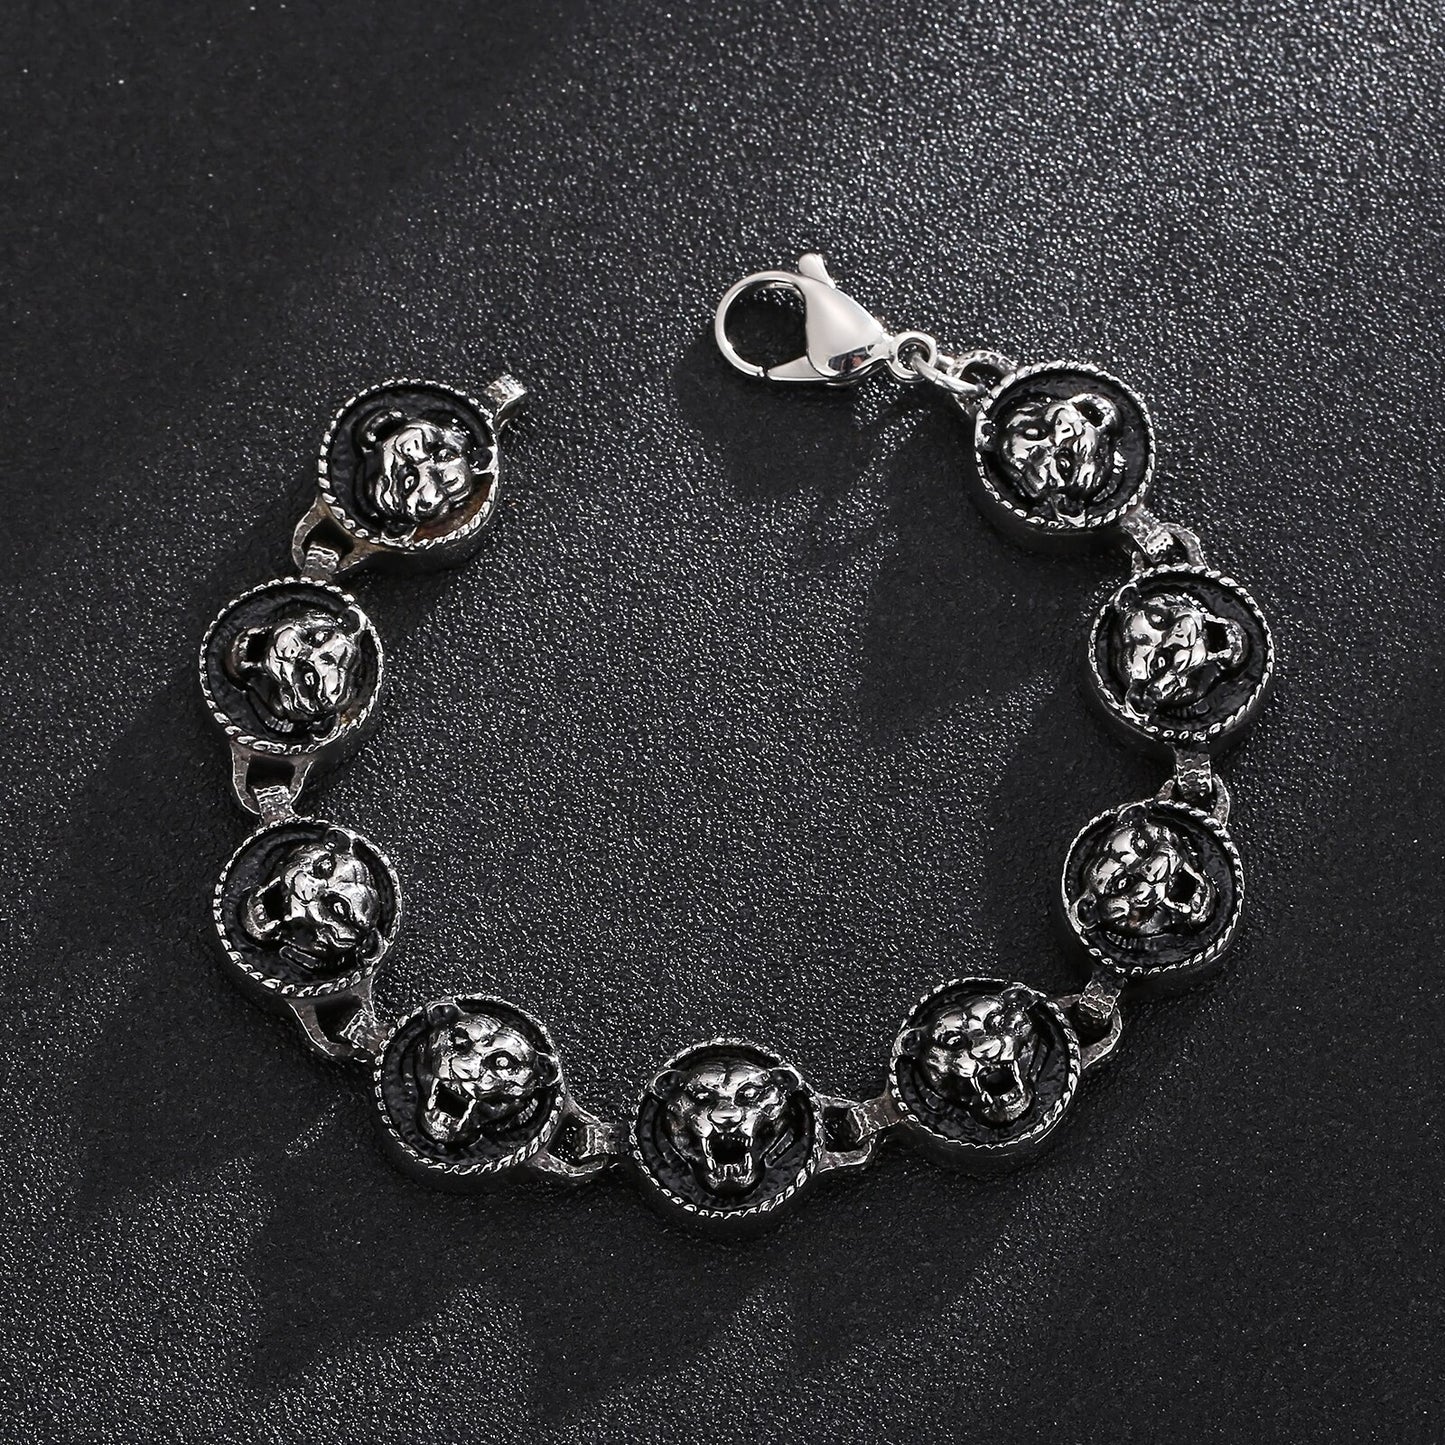 Tiger Head Charm Bracelet for Men 8.66 Inch Vintage Black Stainless Steel Punk Animal Wristband Trendy Jewelry